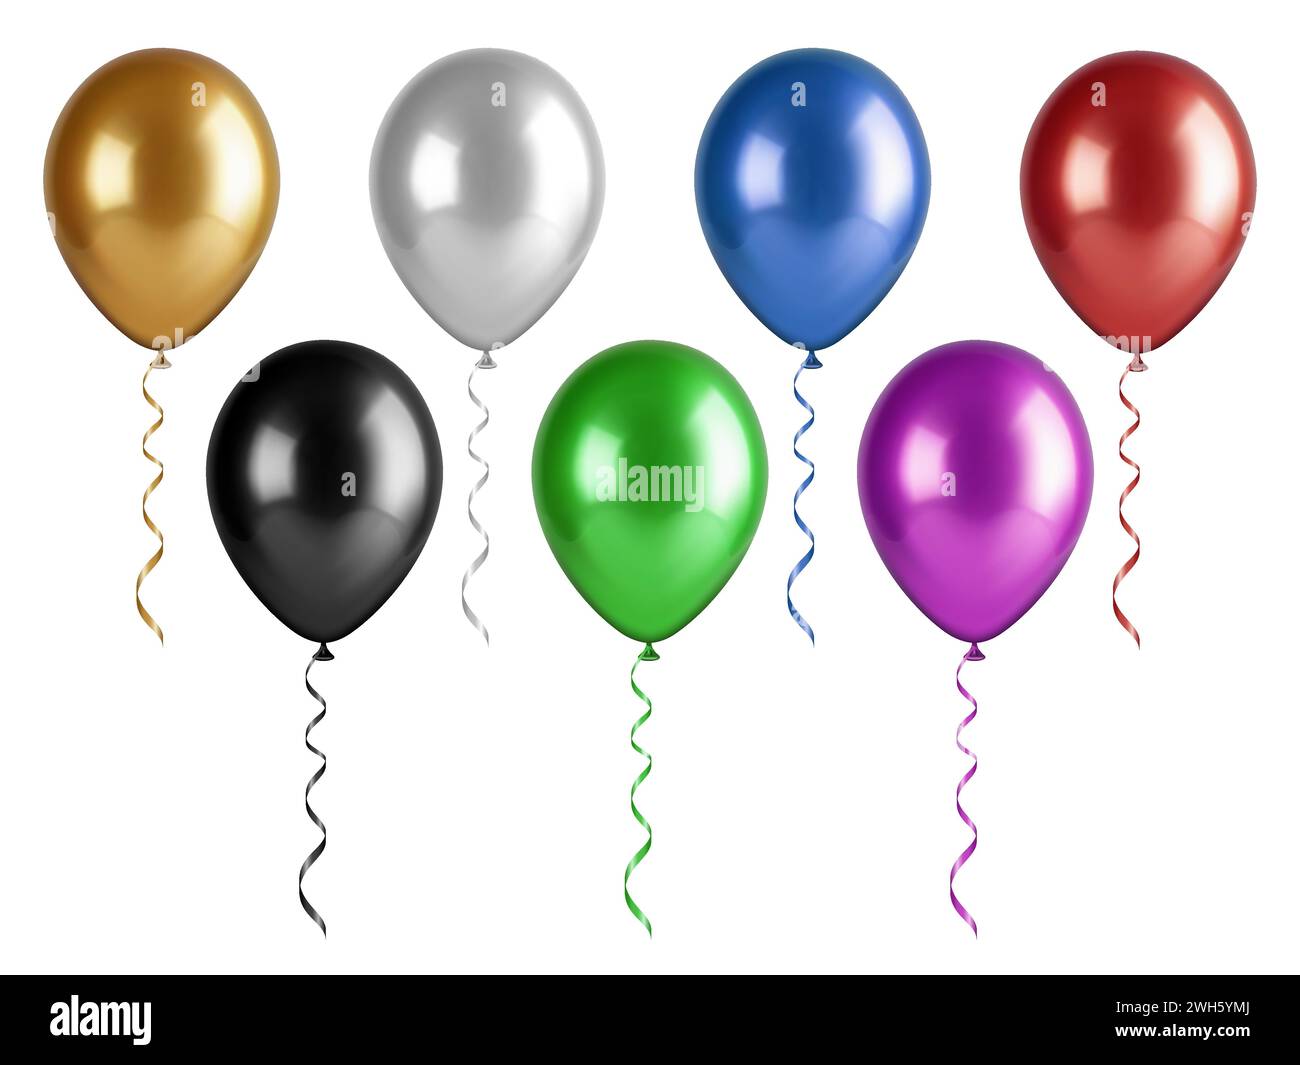 Carnival balloon decoration Stock Vector Images - Page 3 - Alamy